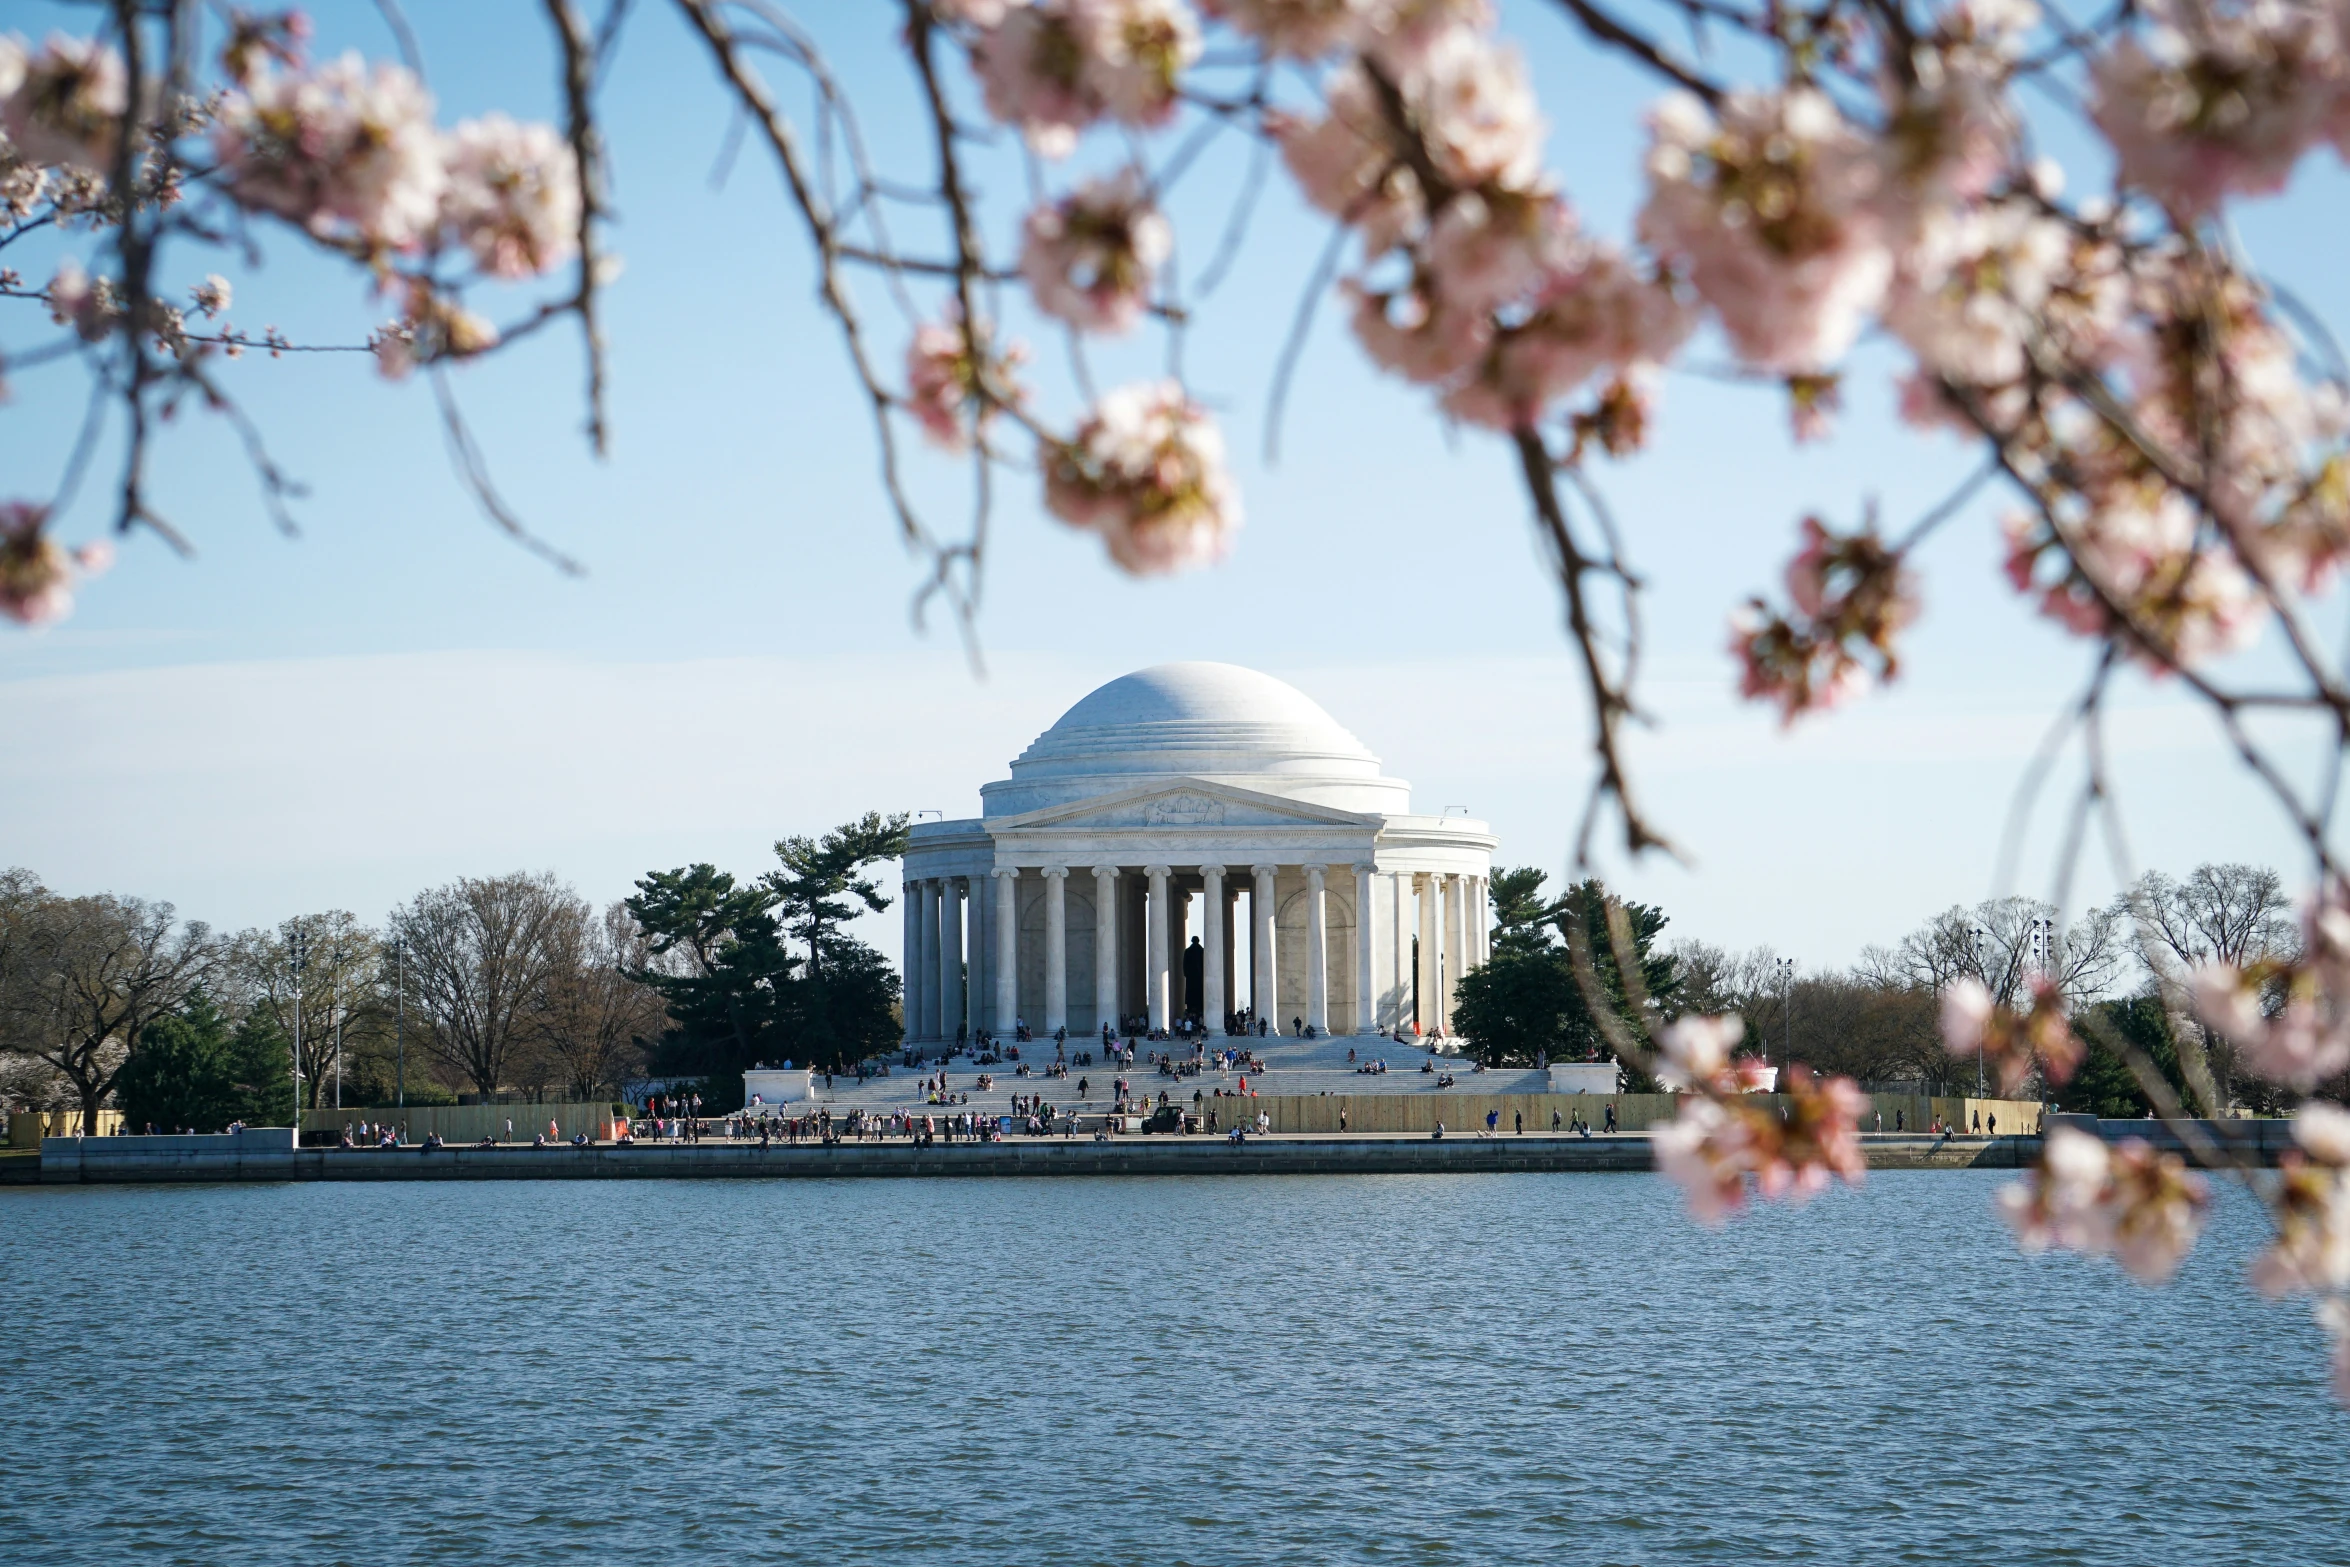 the jefferson memorial stands tall with cherry blossoms near the edge of the lake